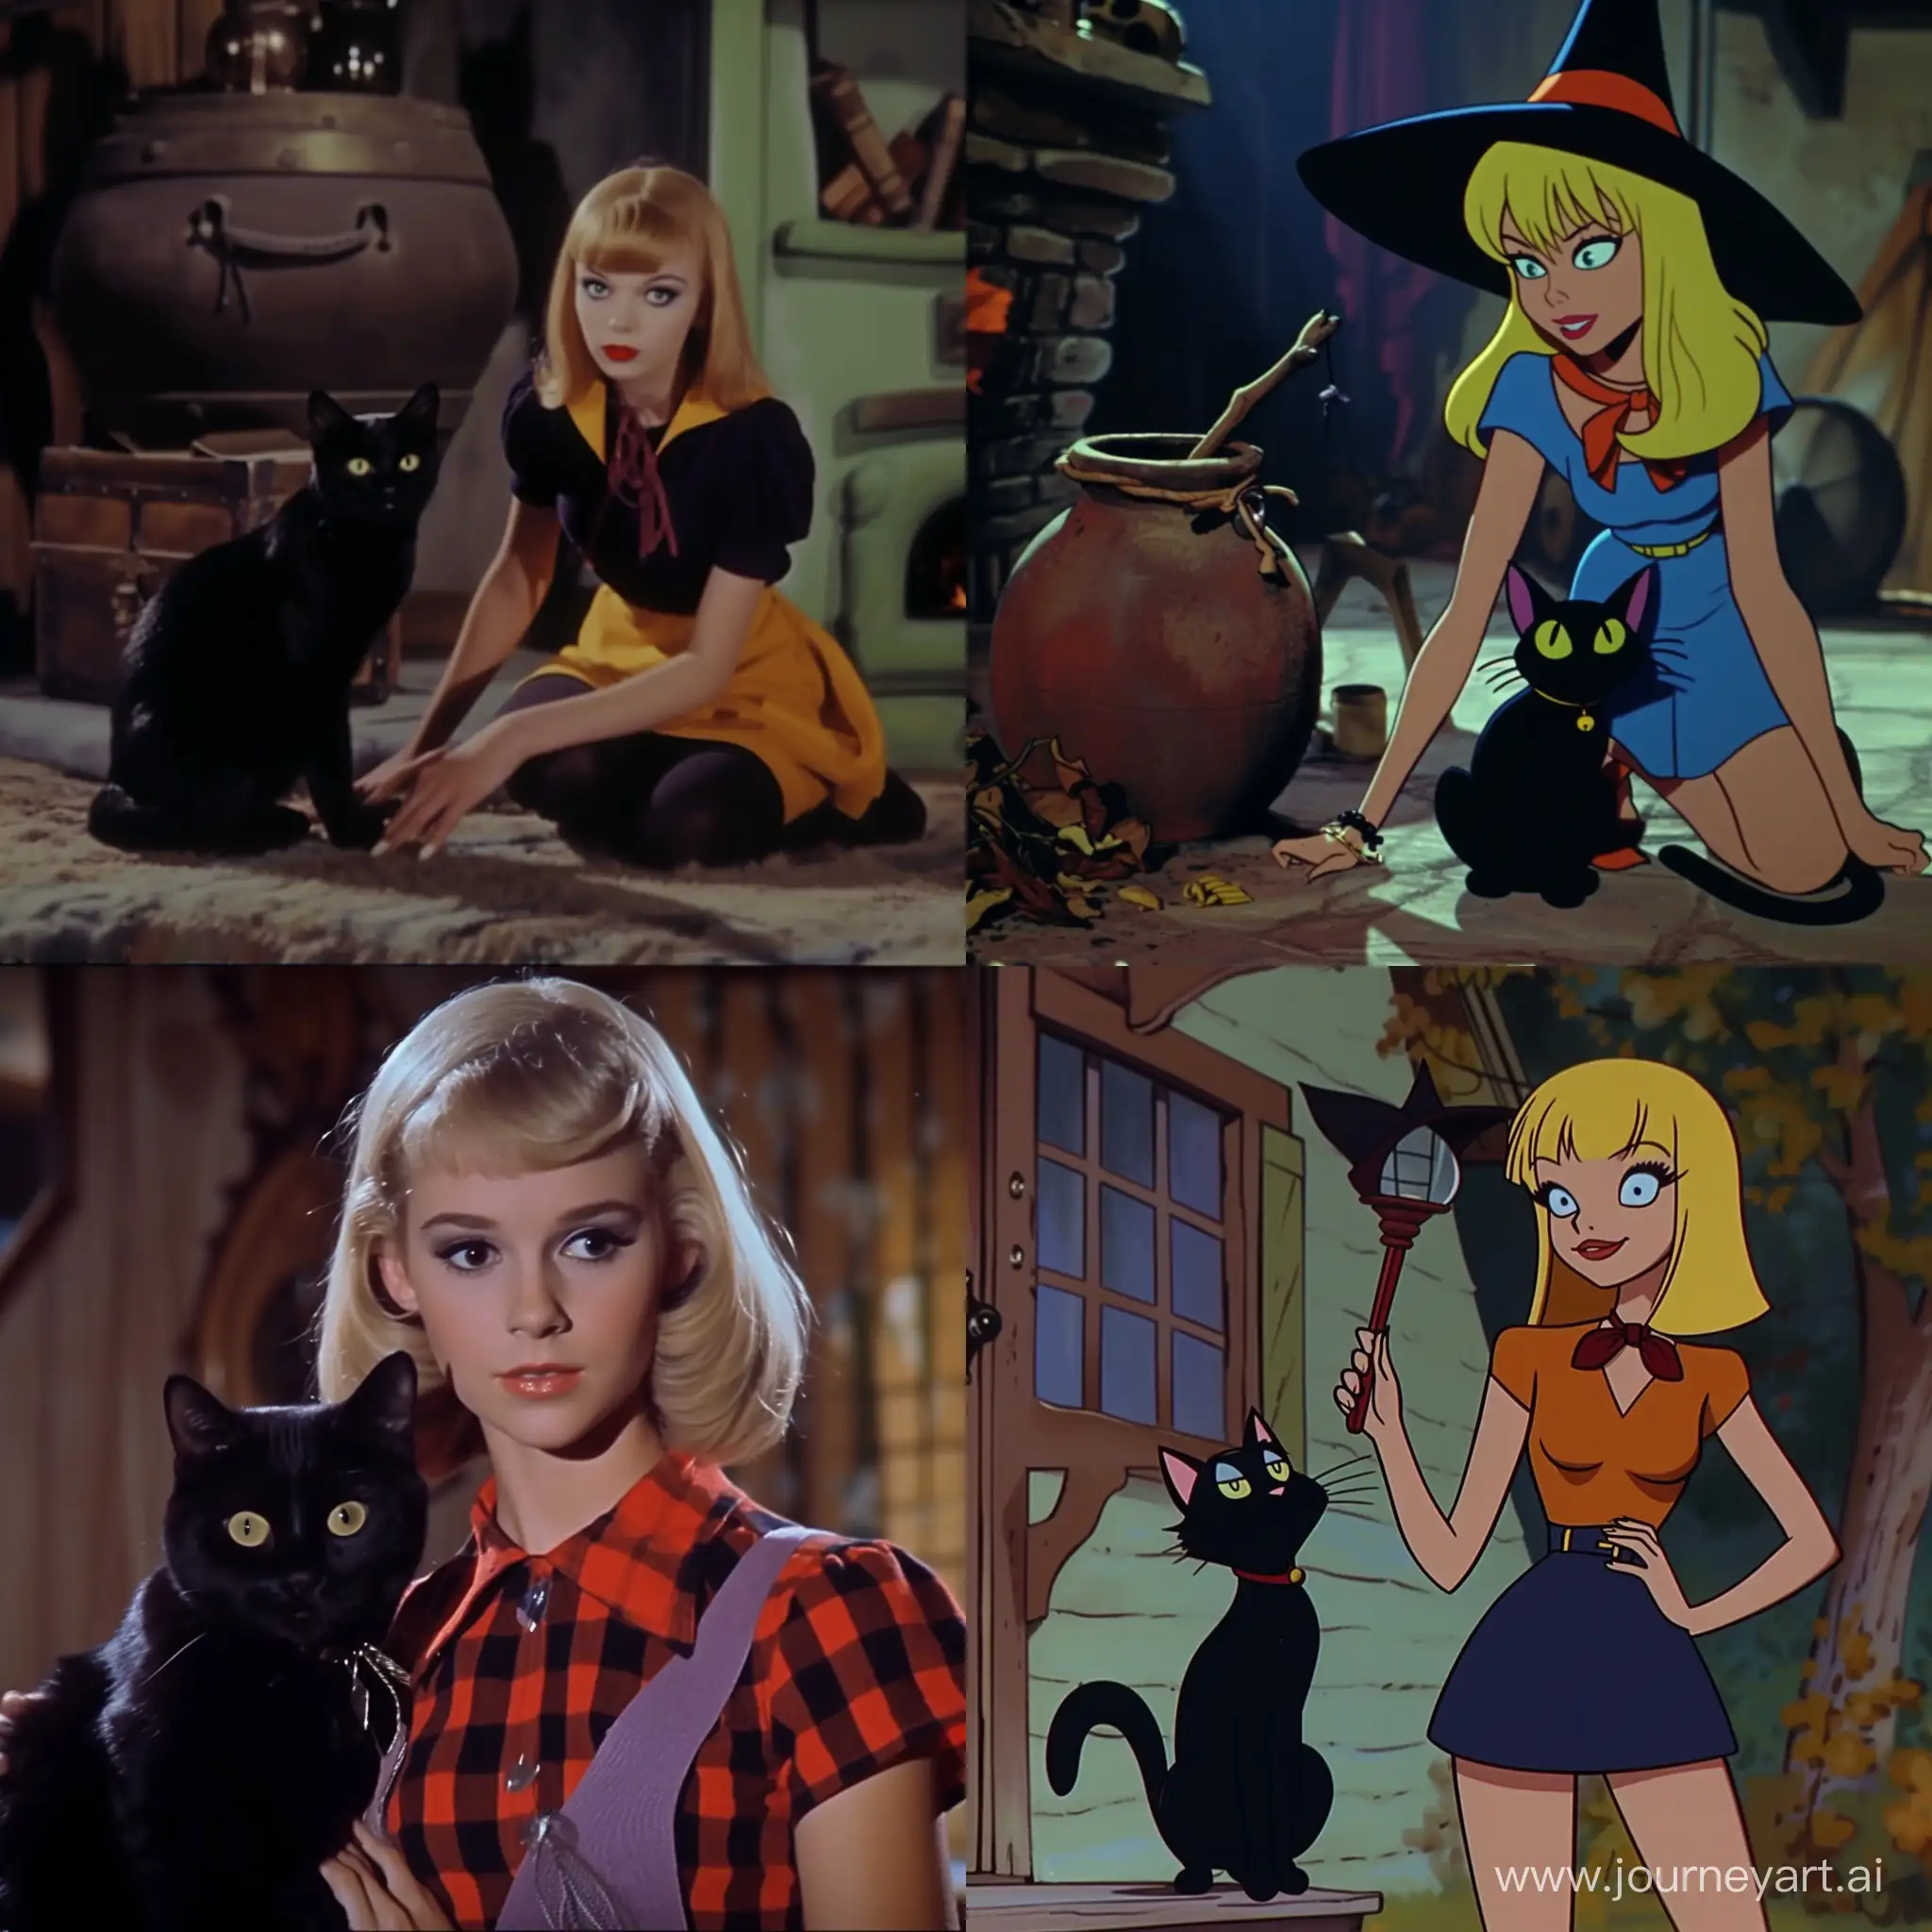 Sabrina-the-Teenage-Witch-and-Black-Cat-in-Magical-Encounter